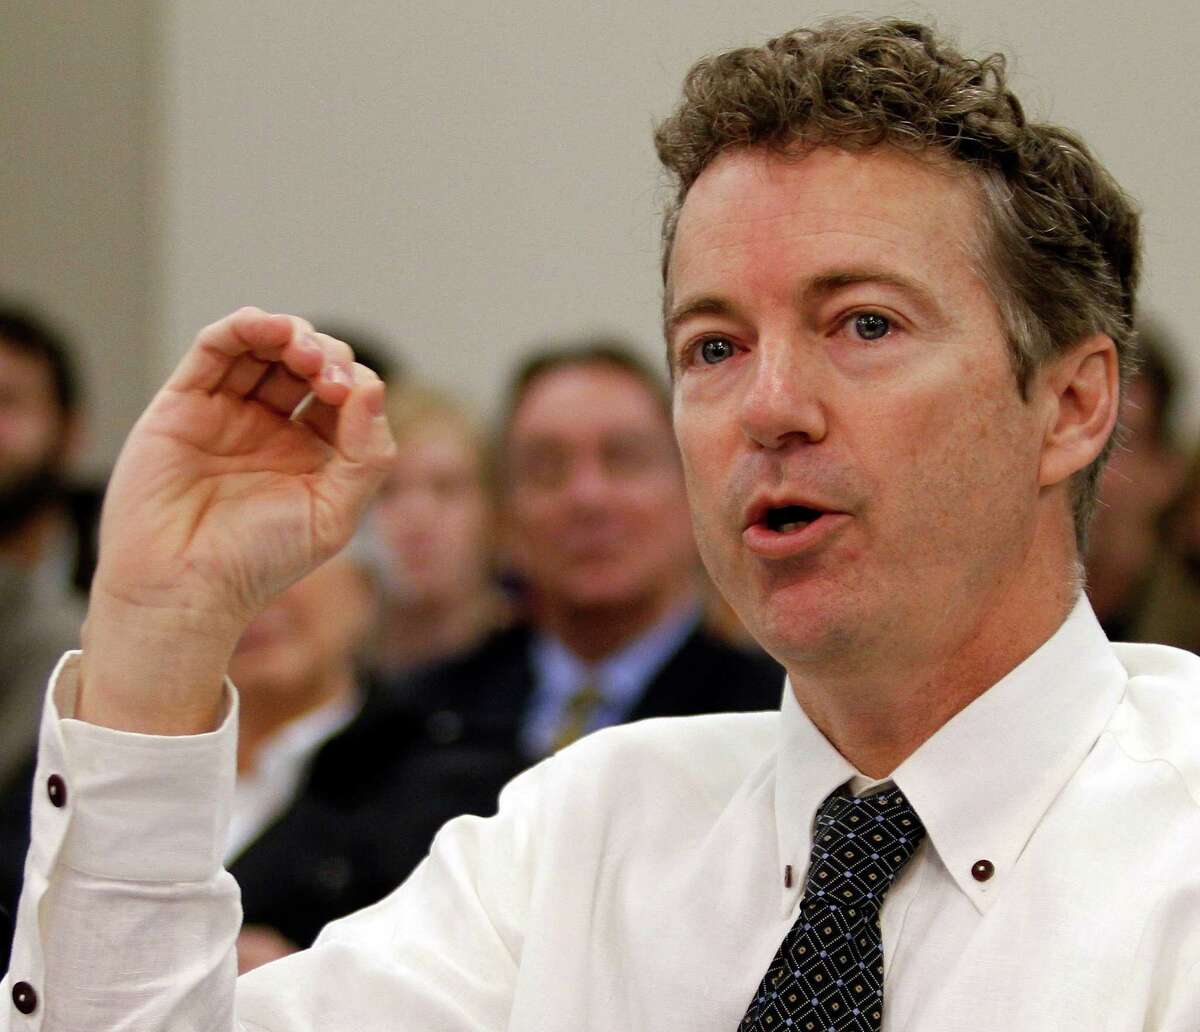 15 facts you might not have known about Rand Paul From his time in a secret society at Baylor to his doctor rebellion, here are some fascinating tidbits about the 2016 White House hopeful.